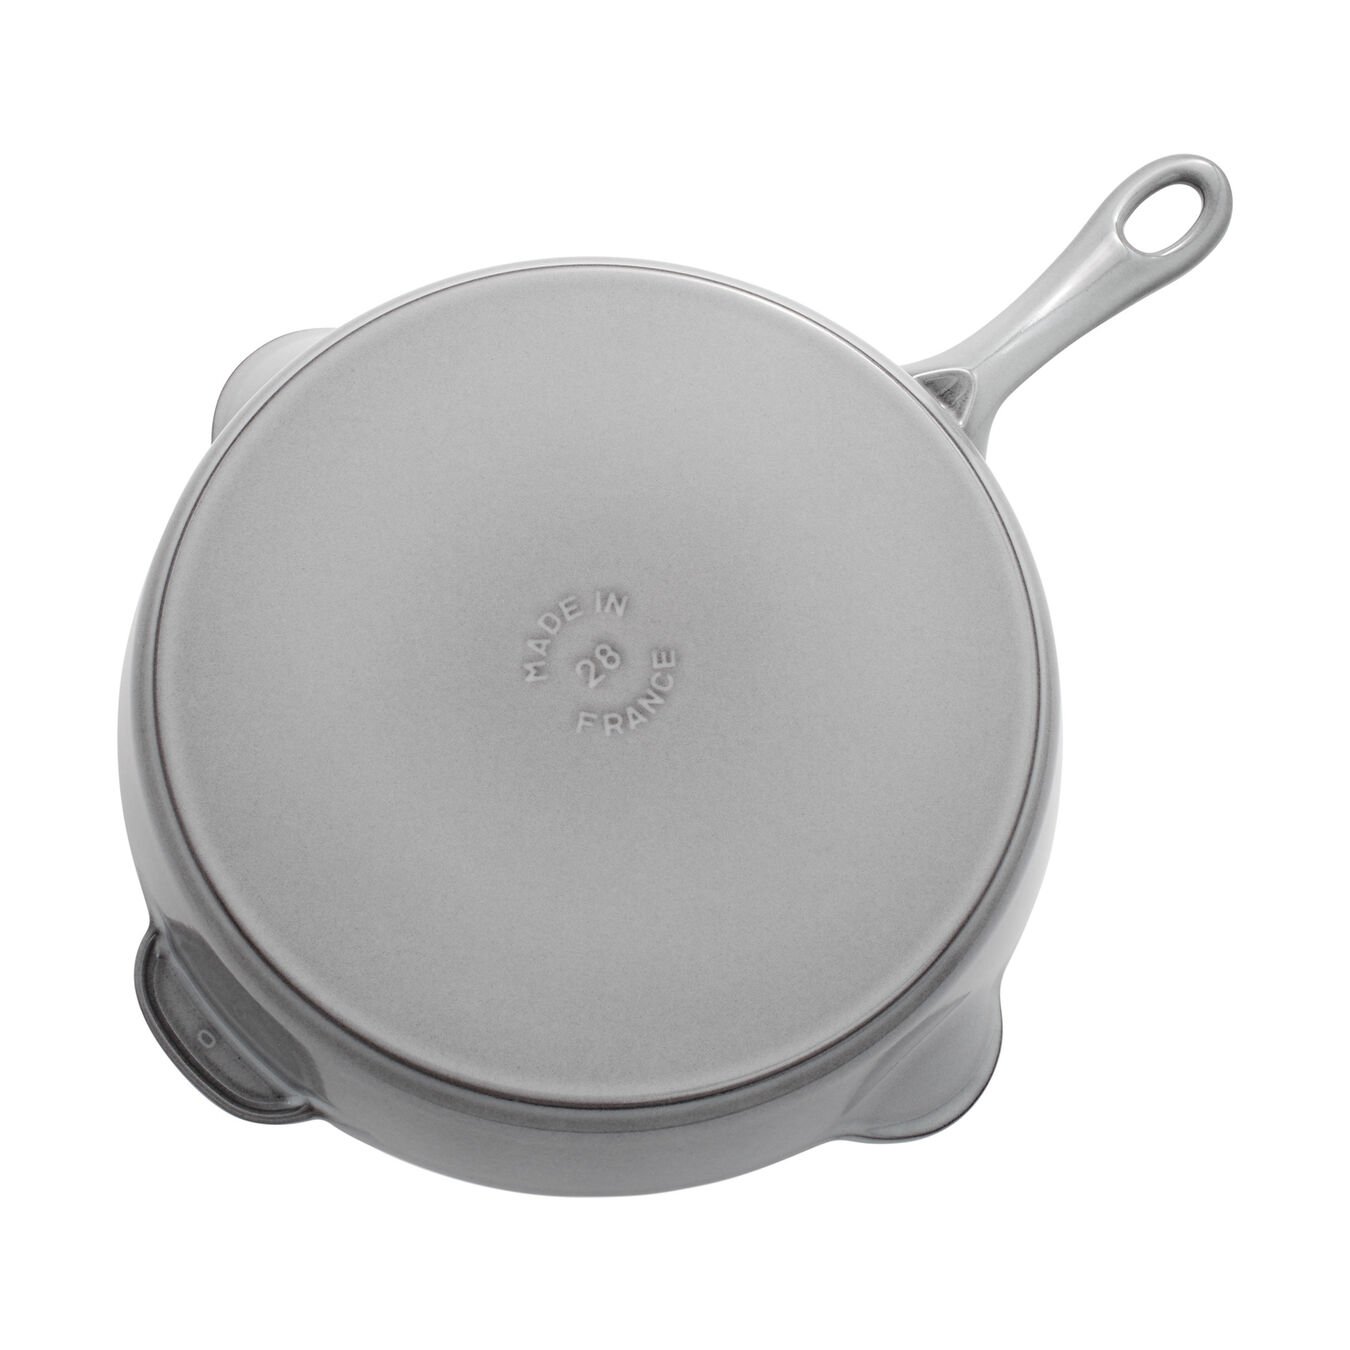 11-inch, Traditional Deep Skillet, graphite grey,,large 4